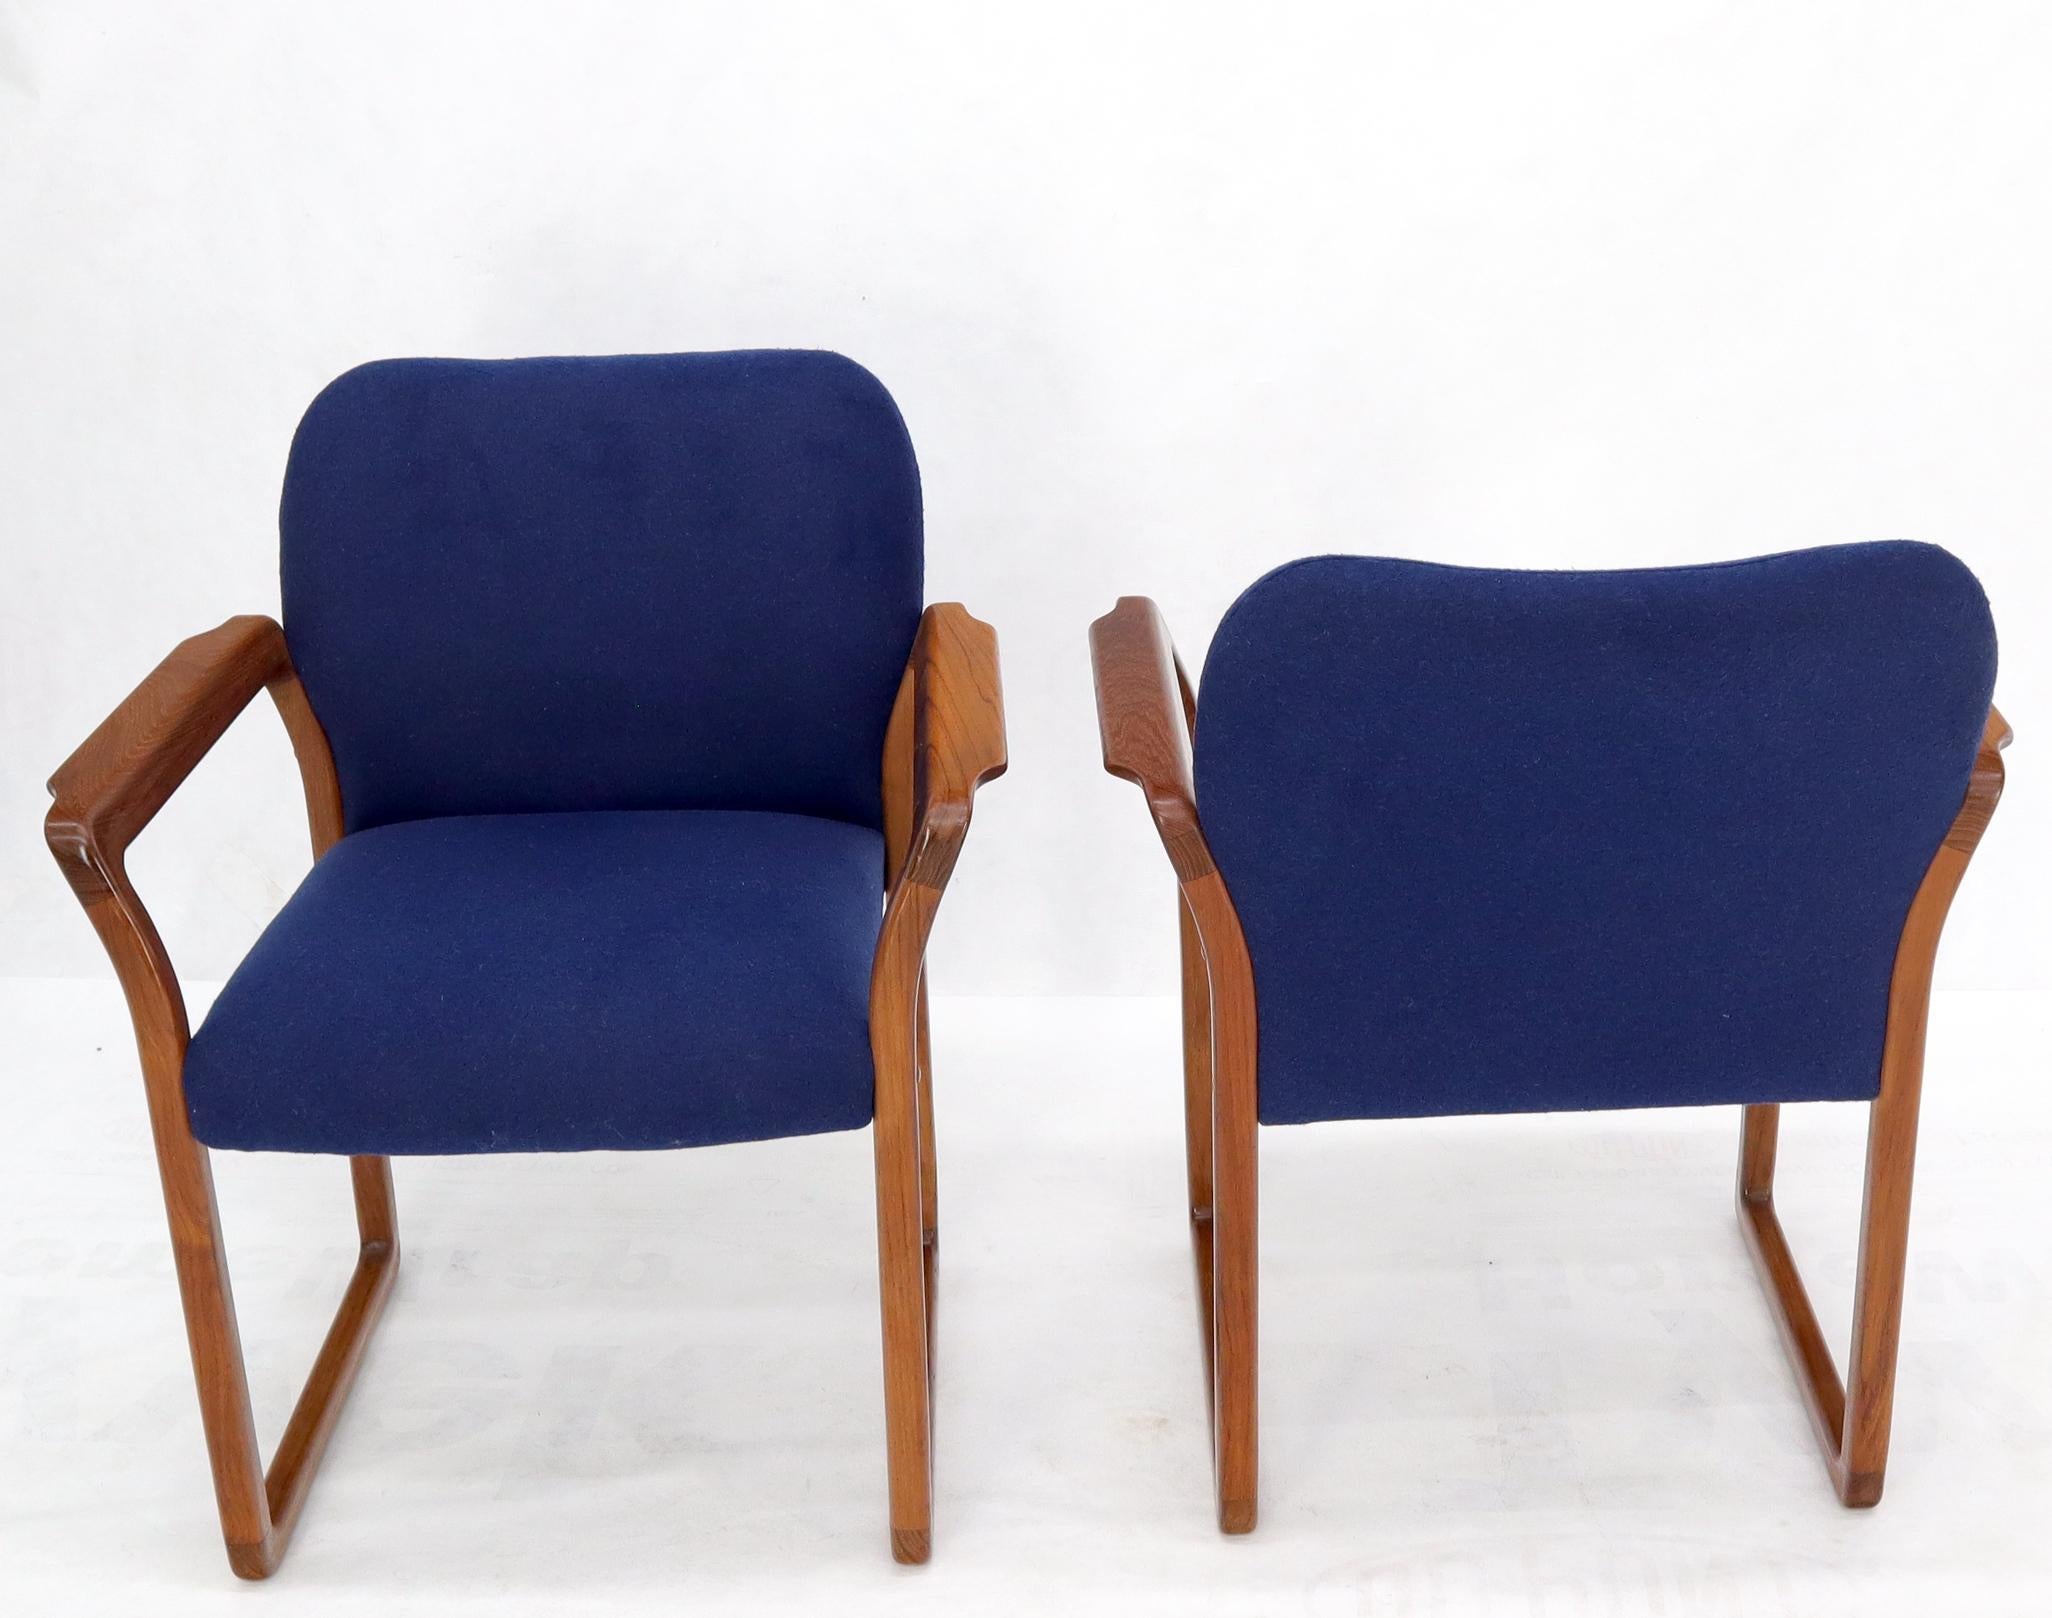 Pair of Danish Mid-Century Modern Teak Arms Chairs New Wool Upholstery For Sale 4